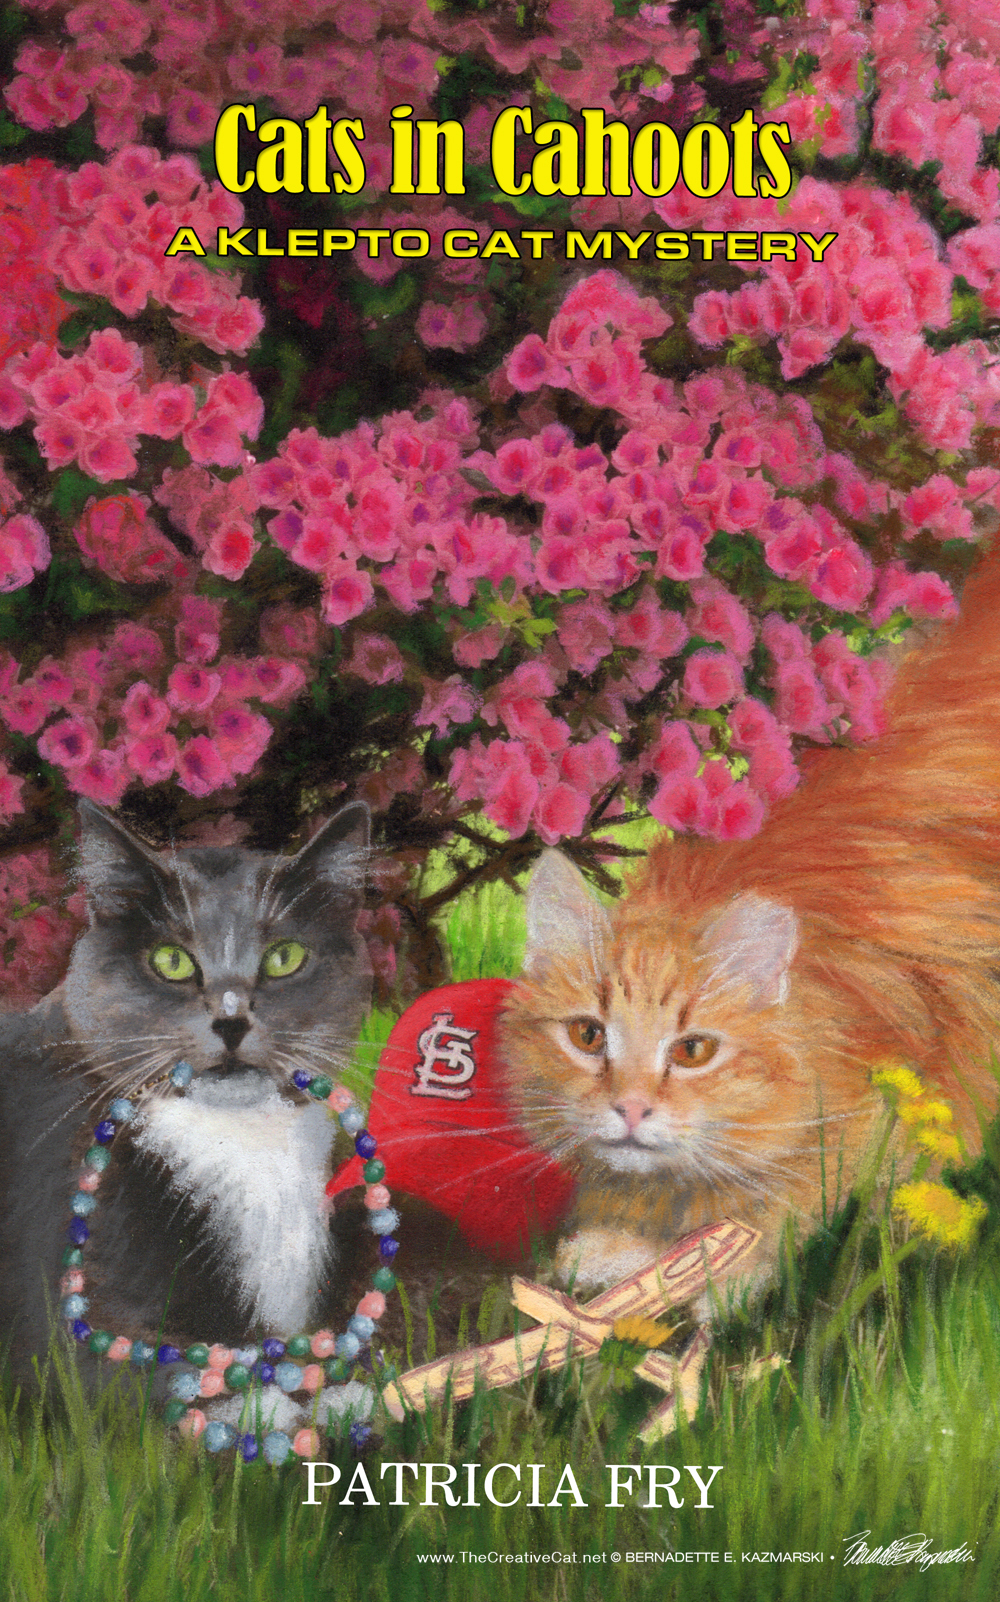 "Cats in Cahoots" final cover.